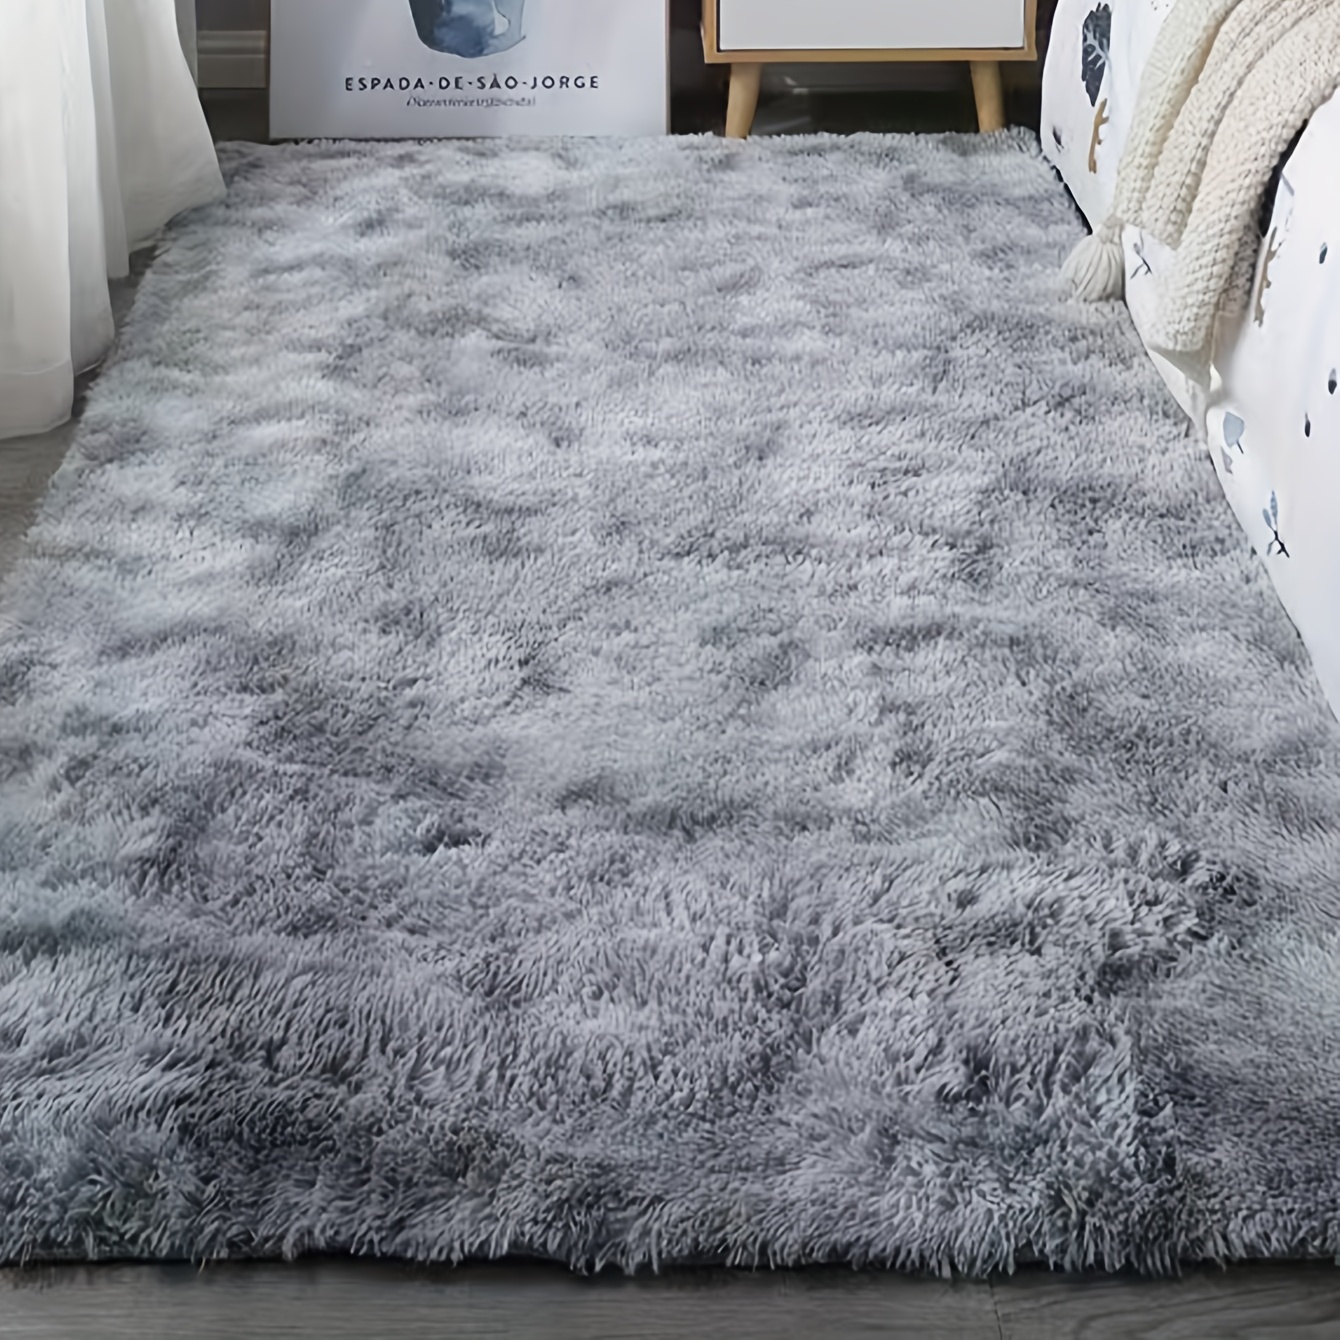 1pc ultra plush soft area rugs for bedroom living room luxury tied dyed fluffy bedside rug washable shag furry carpet non shedding for nursery children kids girls room home decorative rug home decor room decor 27 55 62 99in 70 160cm details 5